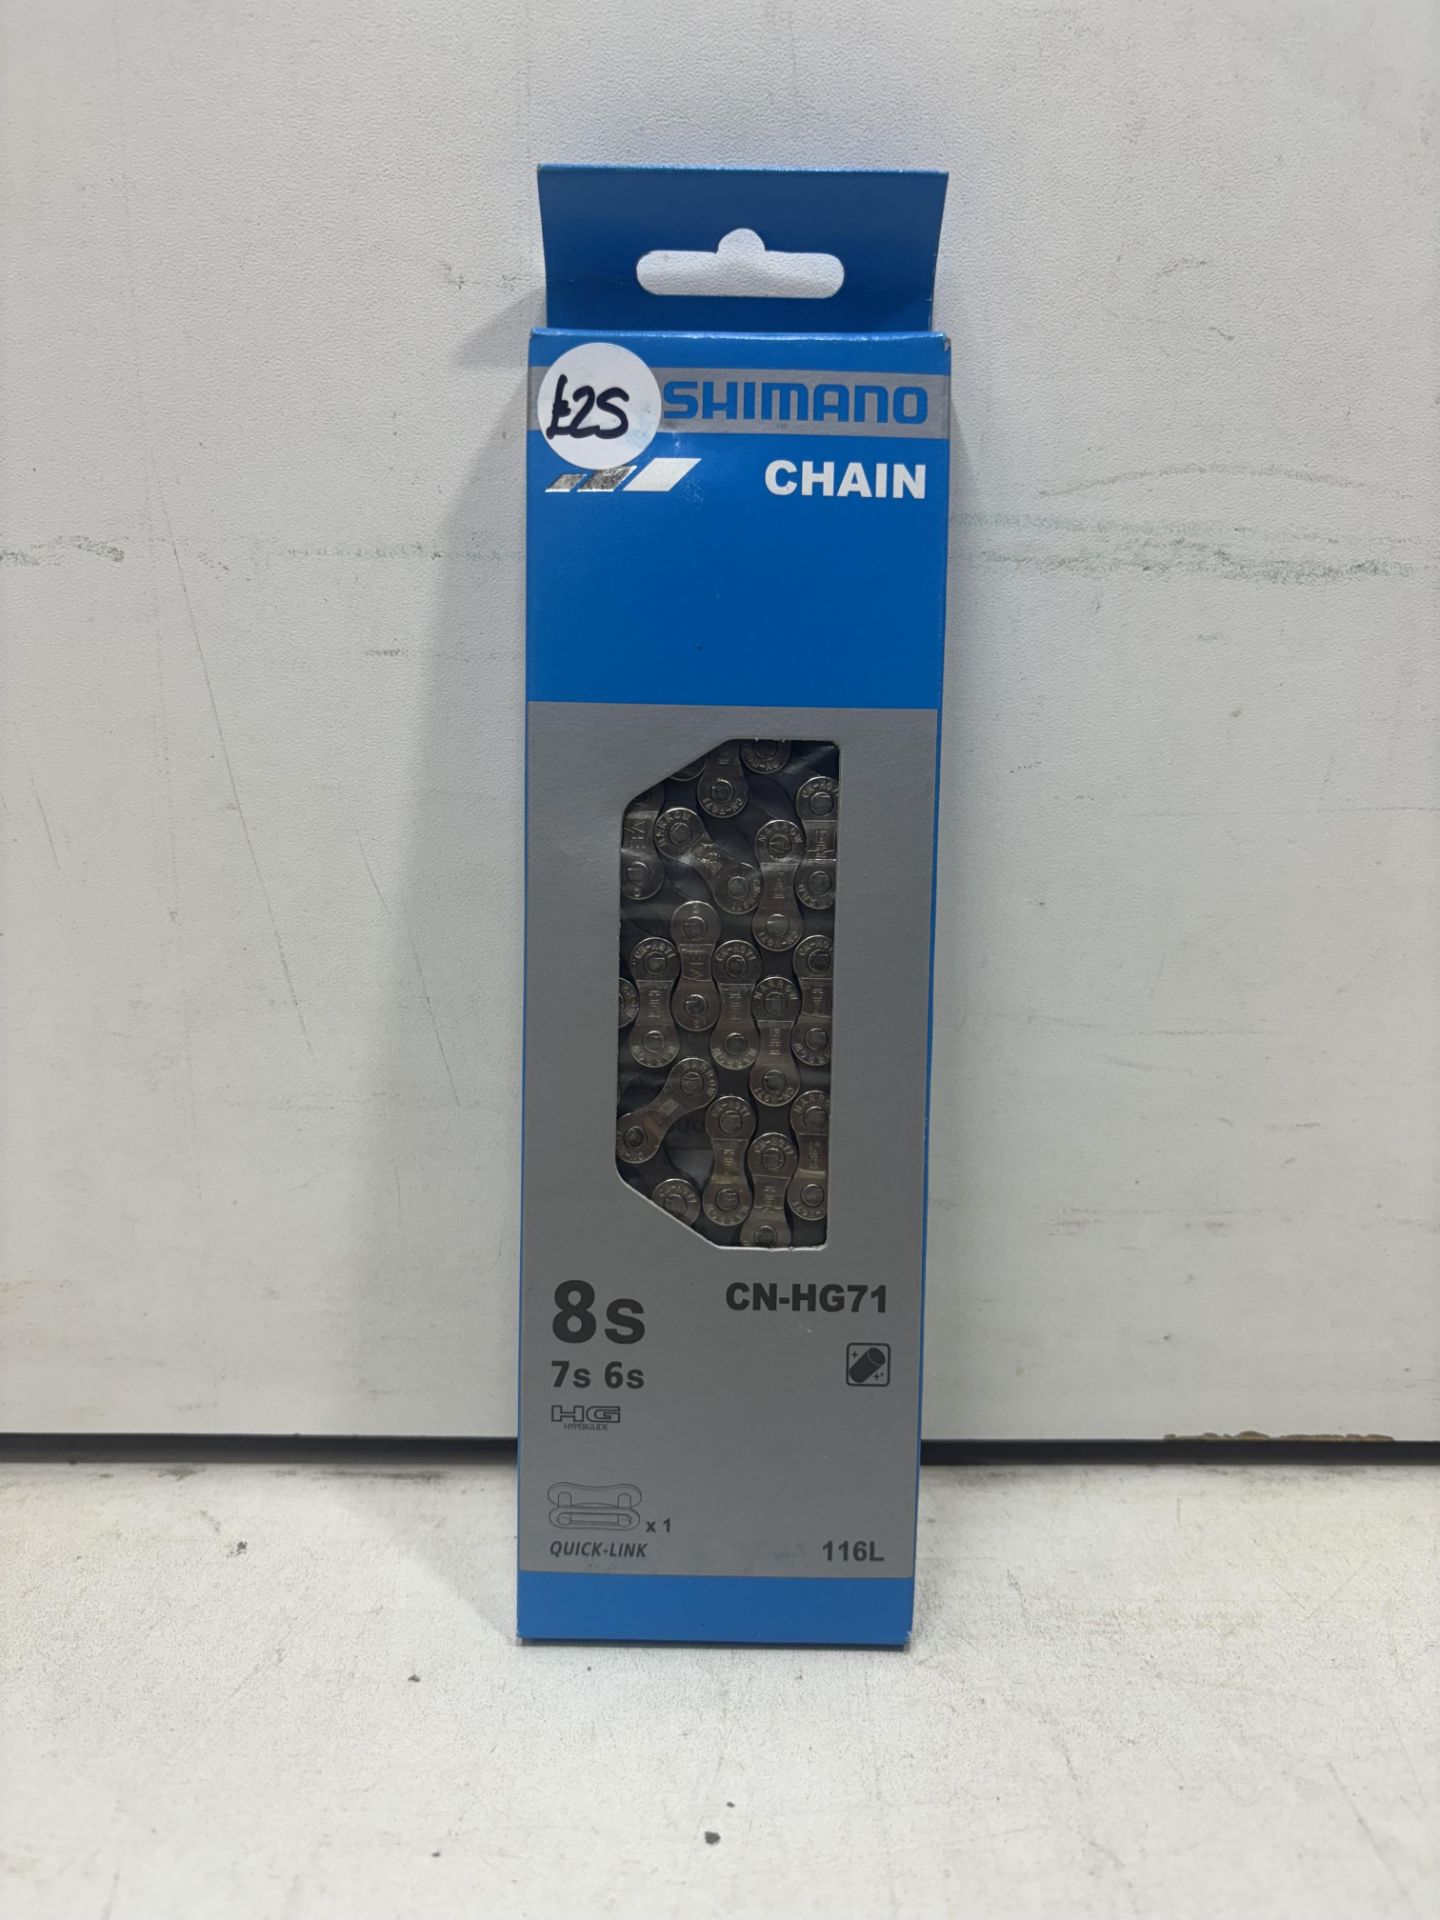 4 x Shimano CN-HG71 Chains - 6, 7, 8-Speed, 116 Links - Image 3 of 4